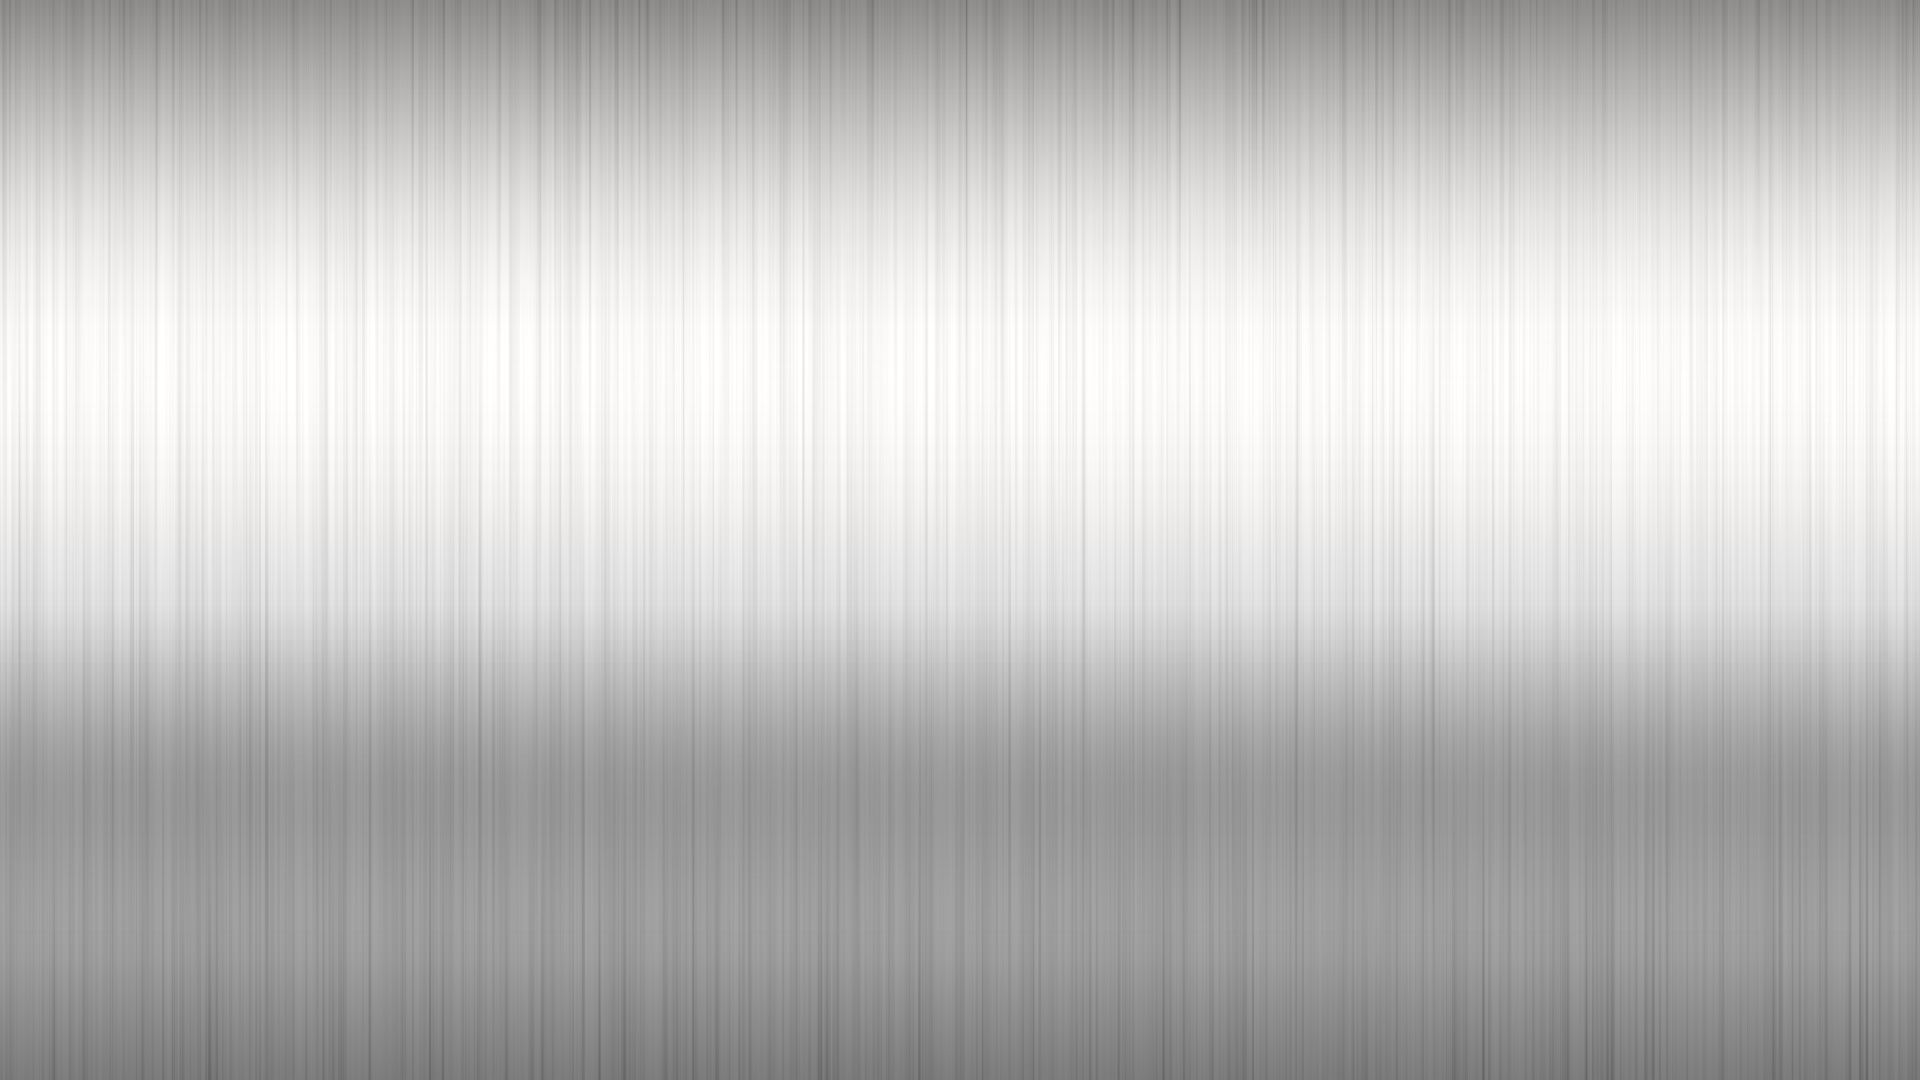 Stainless Steel Wallpaper Image